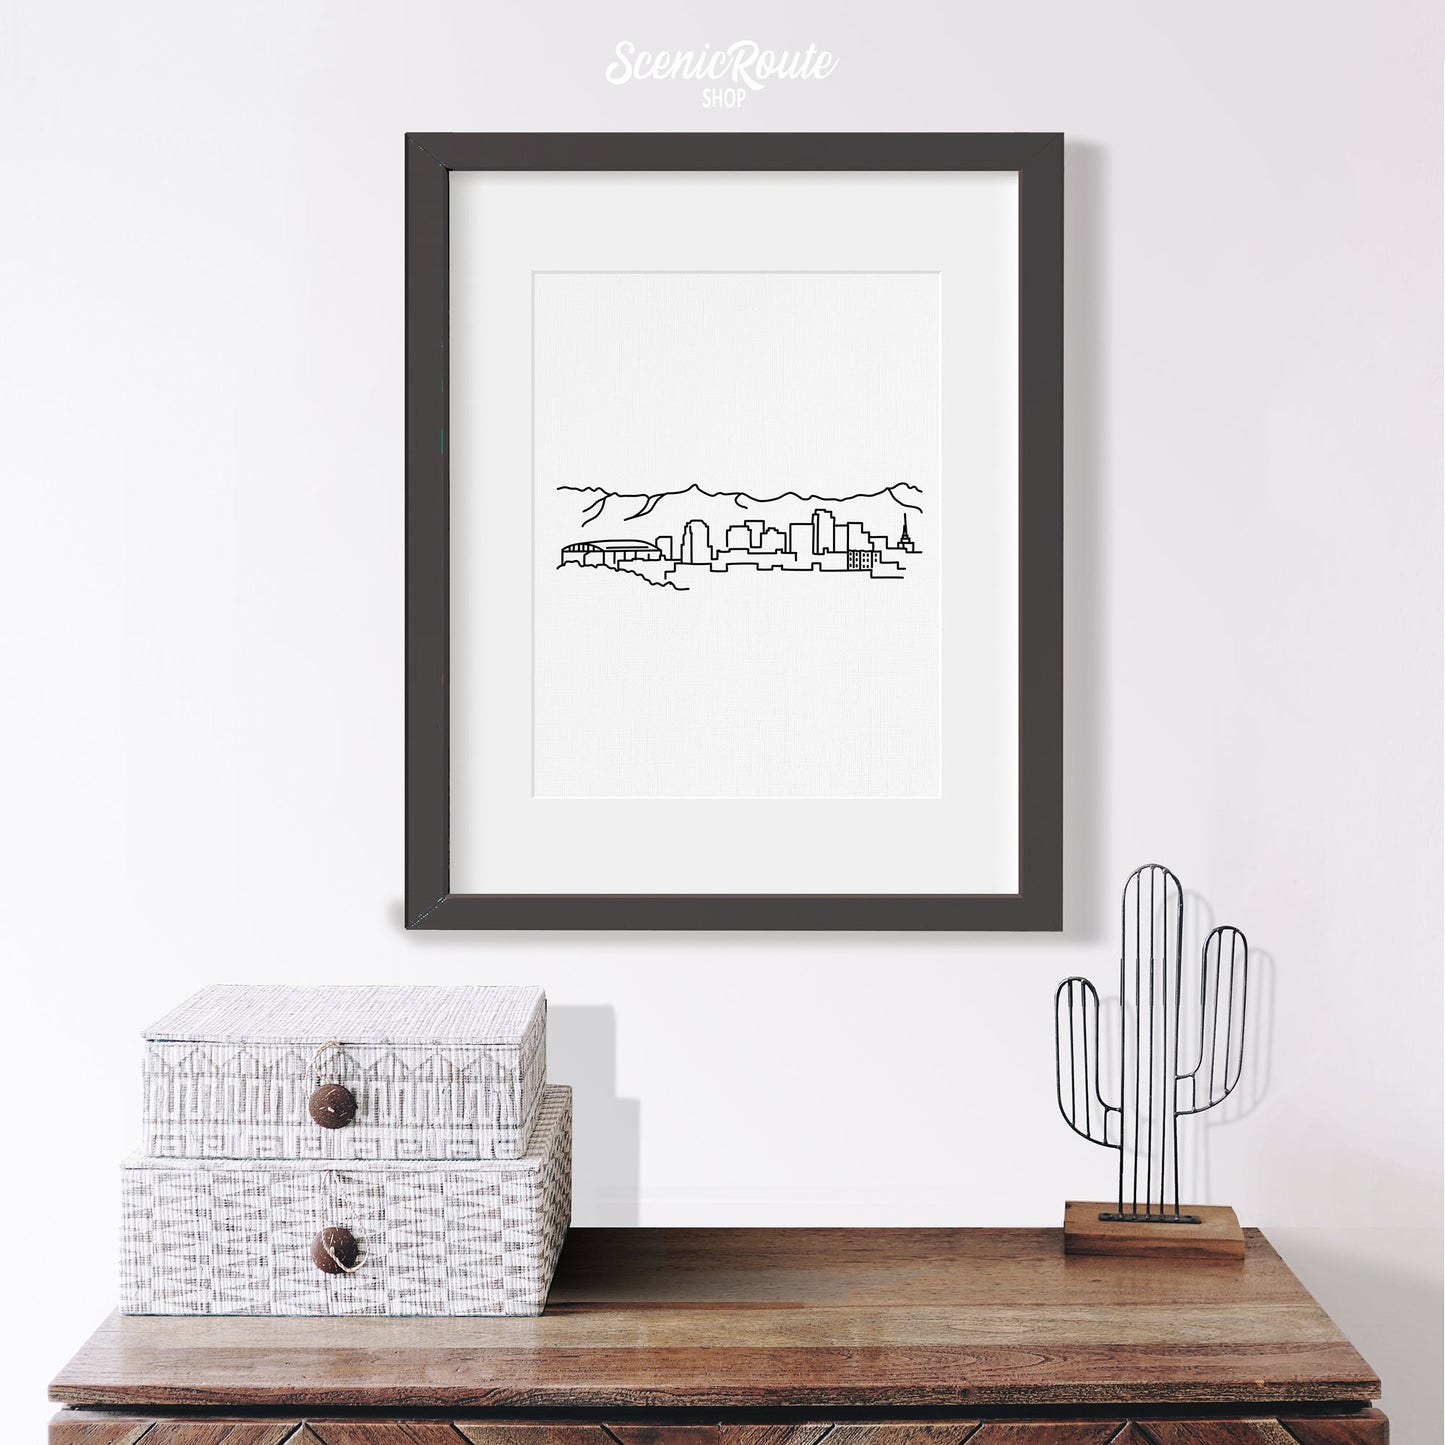 A framed line art drawing of the Phoenix Skyline hanging above a table with saguaro figurine